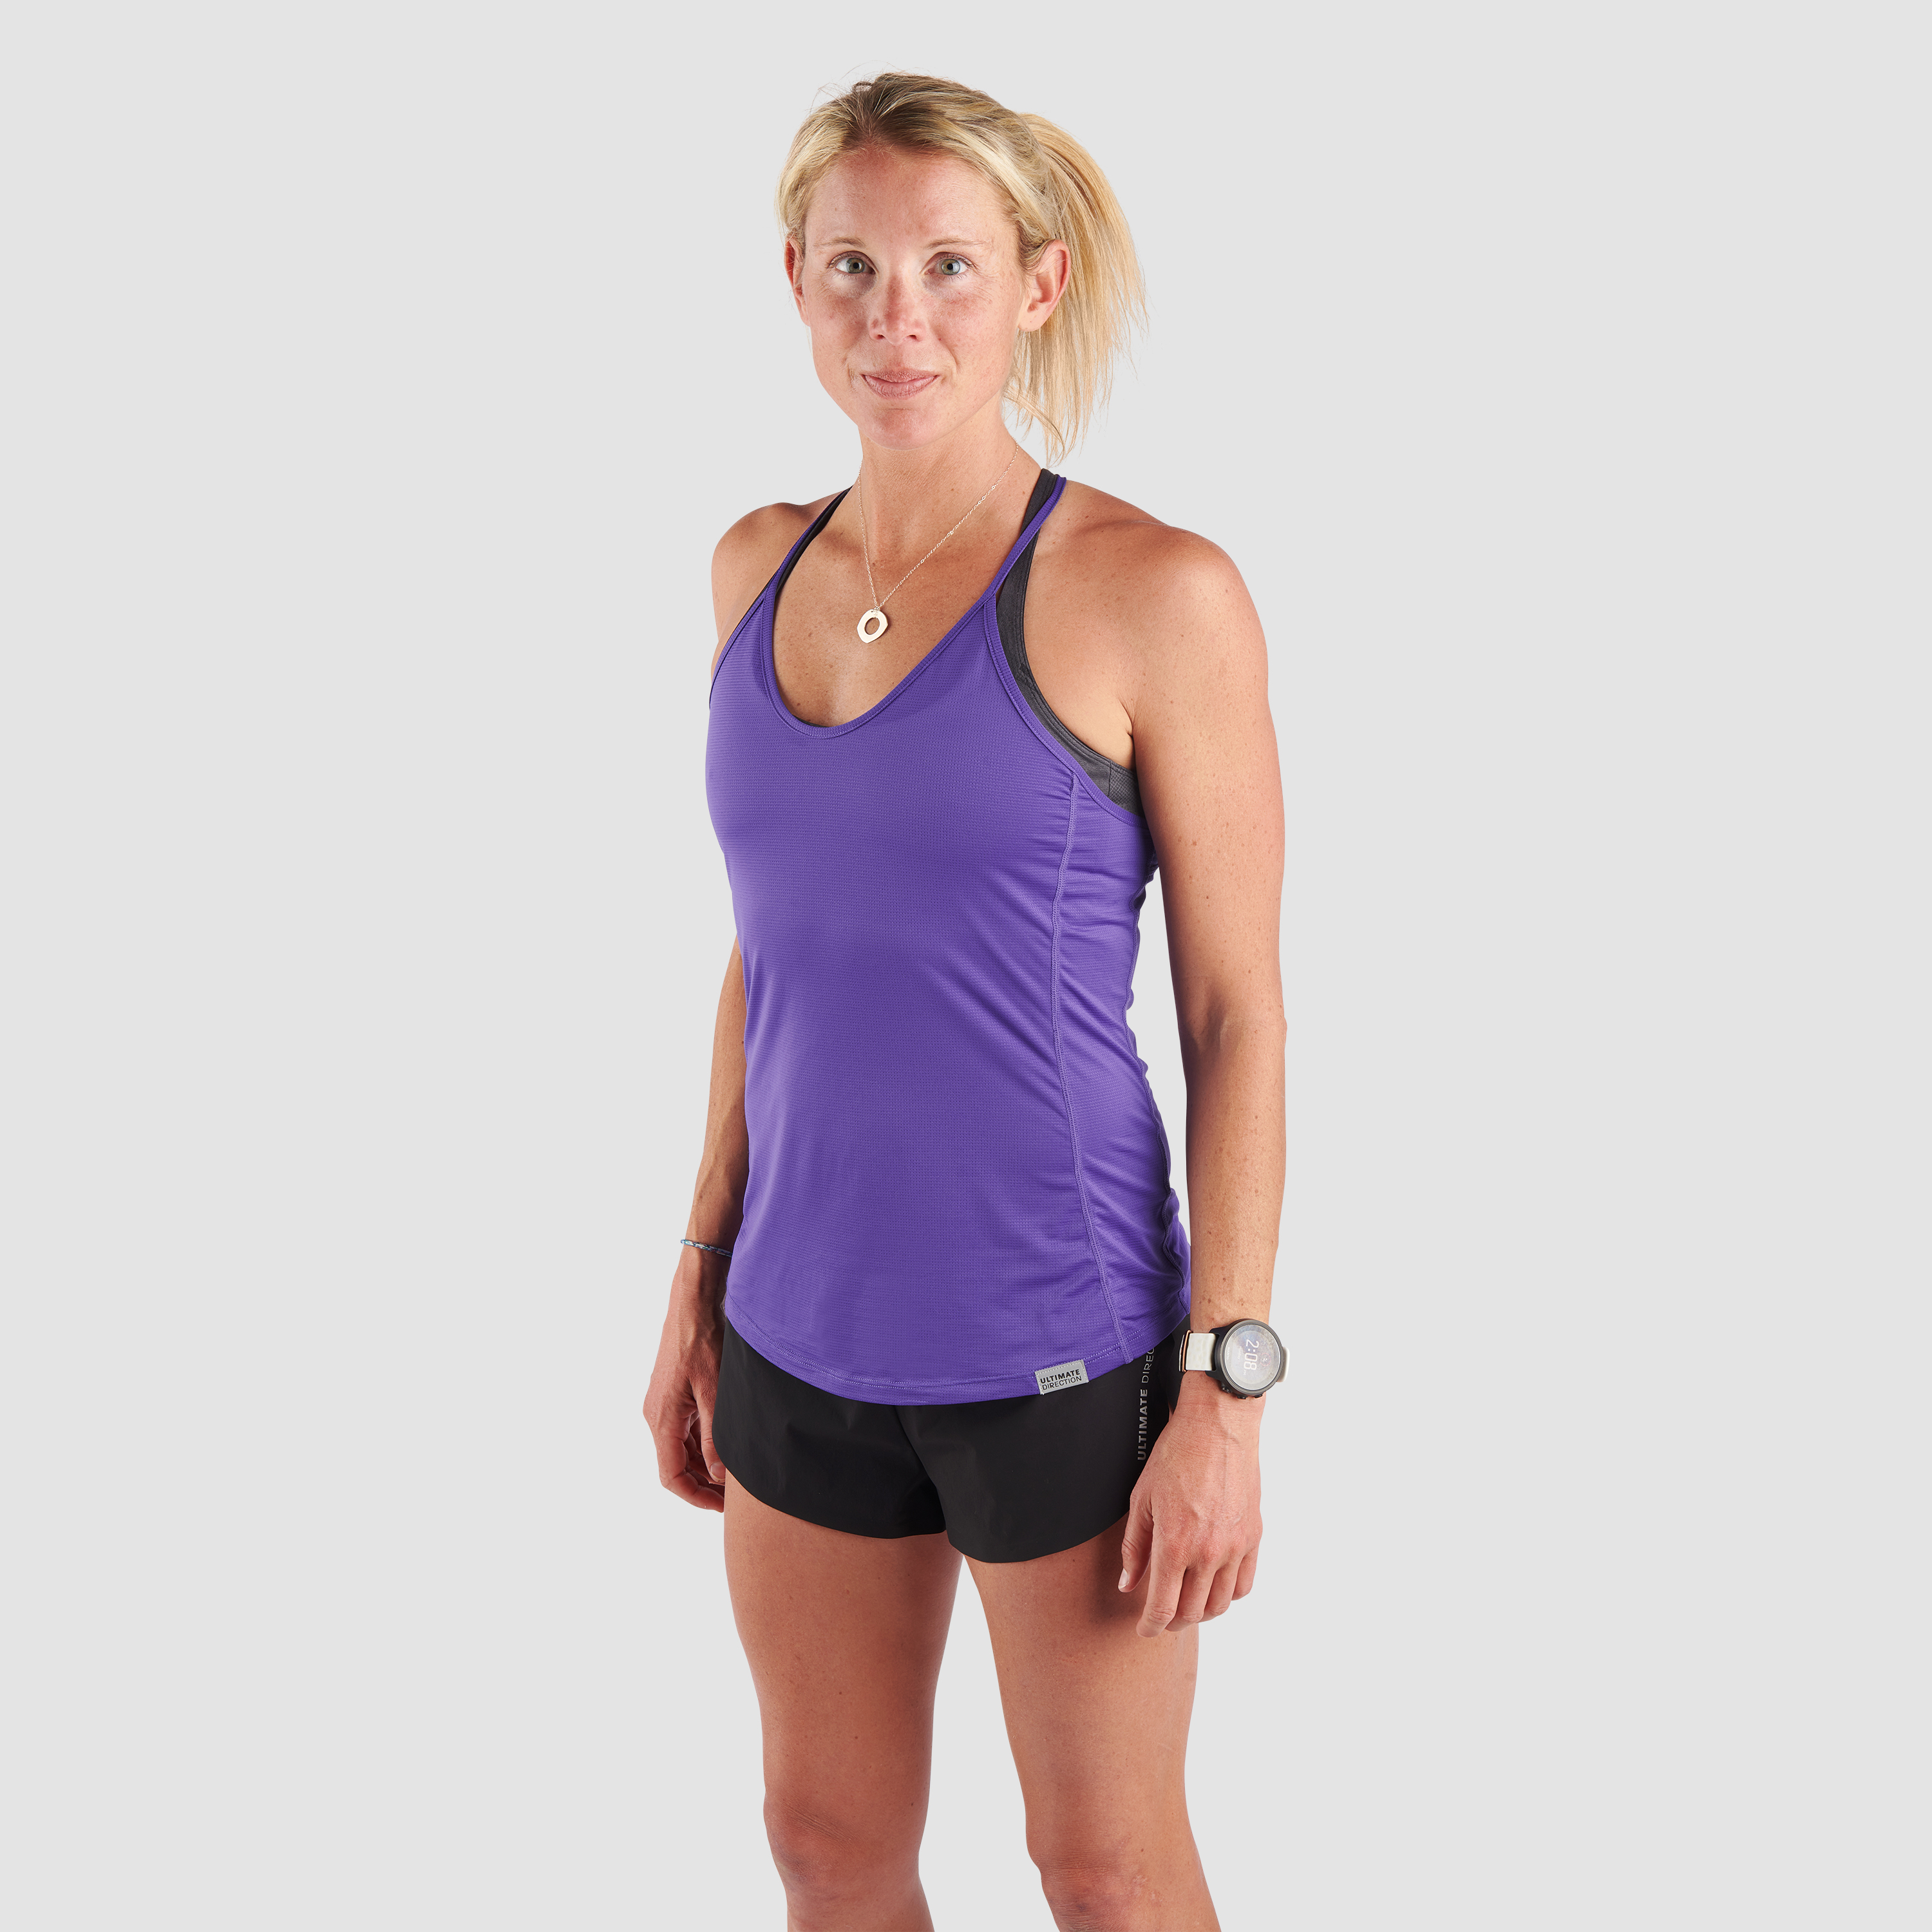 Ultimate Direction Amelia Boone Tank Top in ULTRAVIOLET Size XS